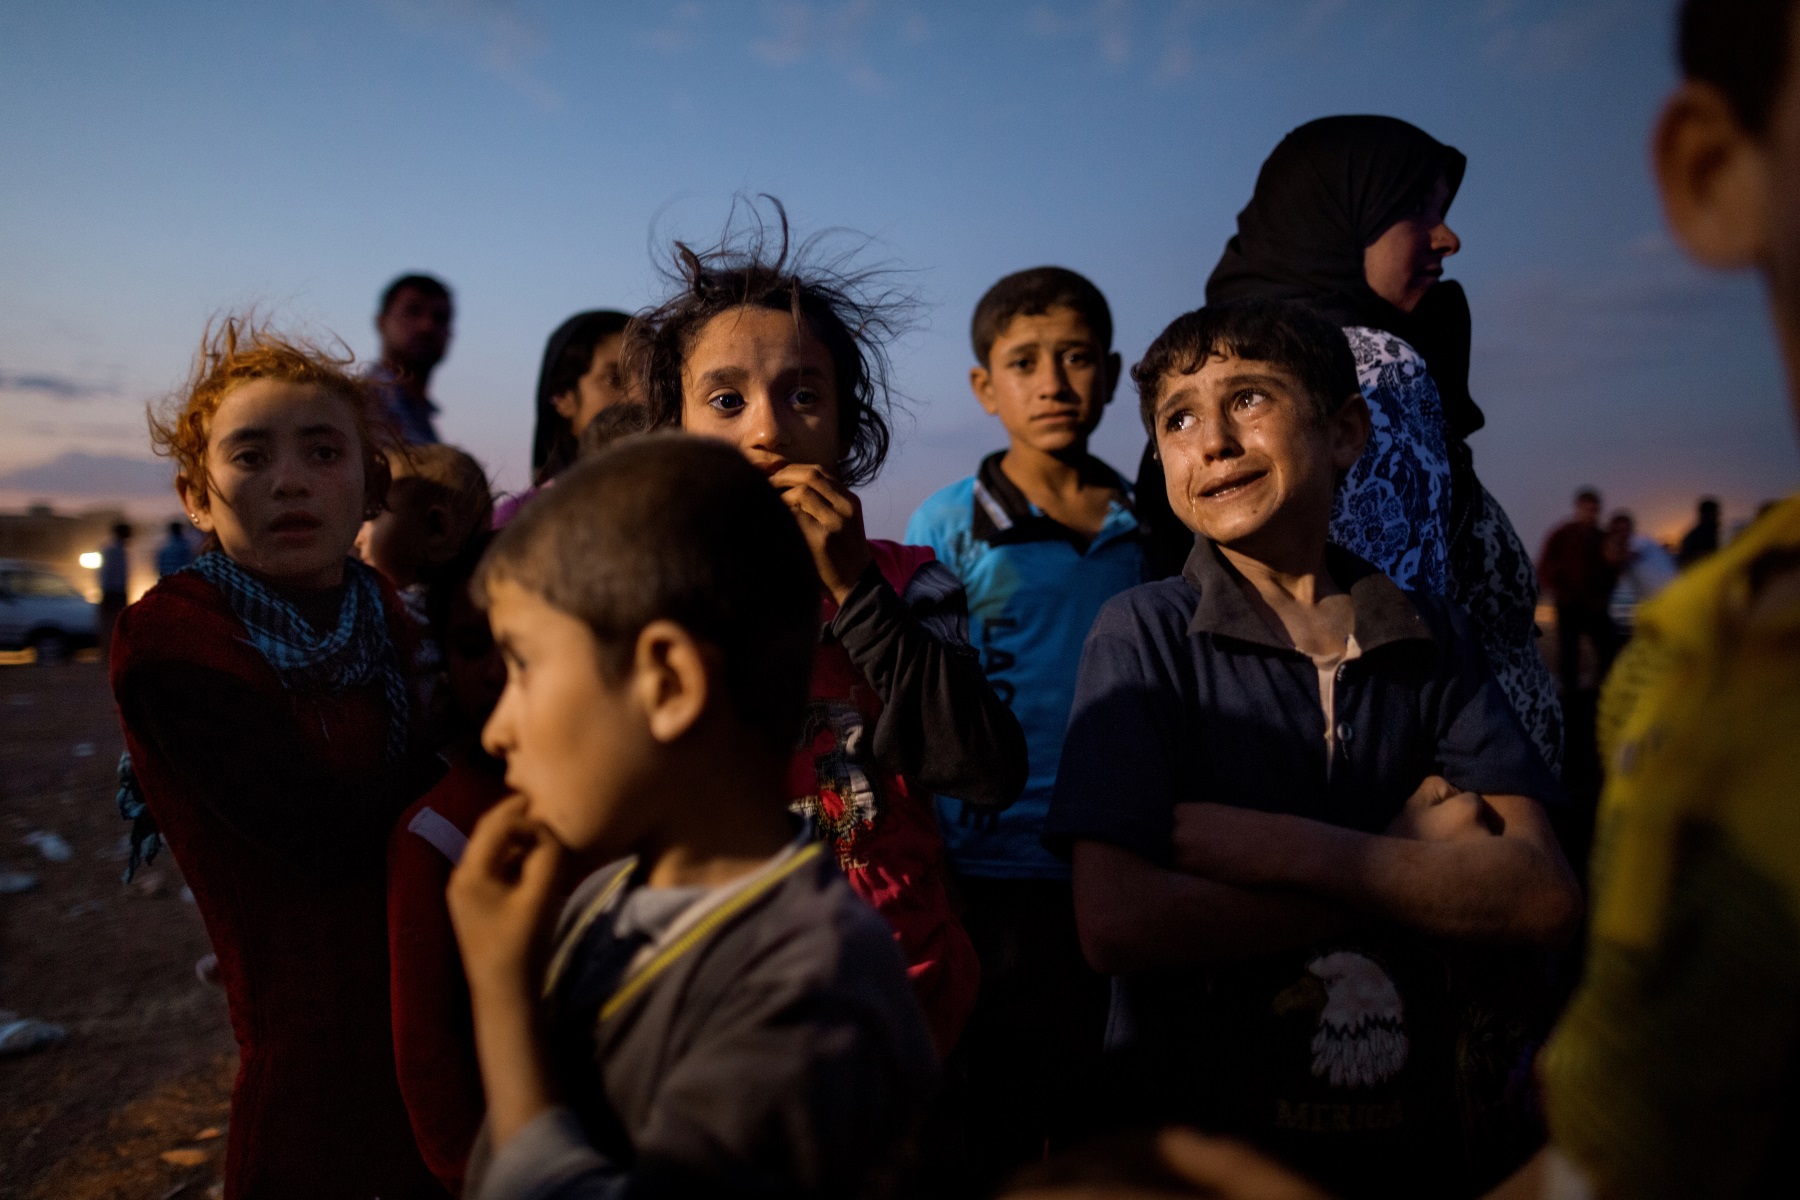 Ahmed, age 5, (right) cries out of fear after crossing into Turkey from Syria with his family Saturday night. Tens of thousands of Kurds fled an Islamic State assault on Kobani in Syria and stream across the border into the Turkish town of Dikmetas on Saturday, September 20, 2014. This was day two of the exodus when 200,000 Syrian's, mostly Kurds, crossed into Turkey in 72 hours.